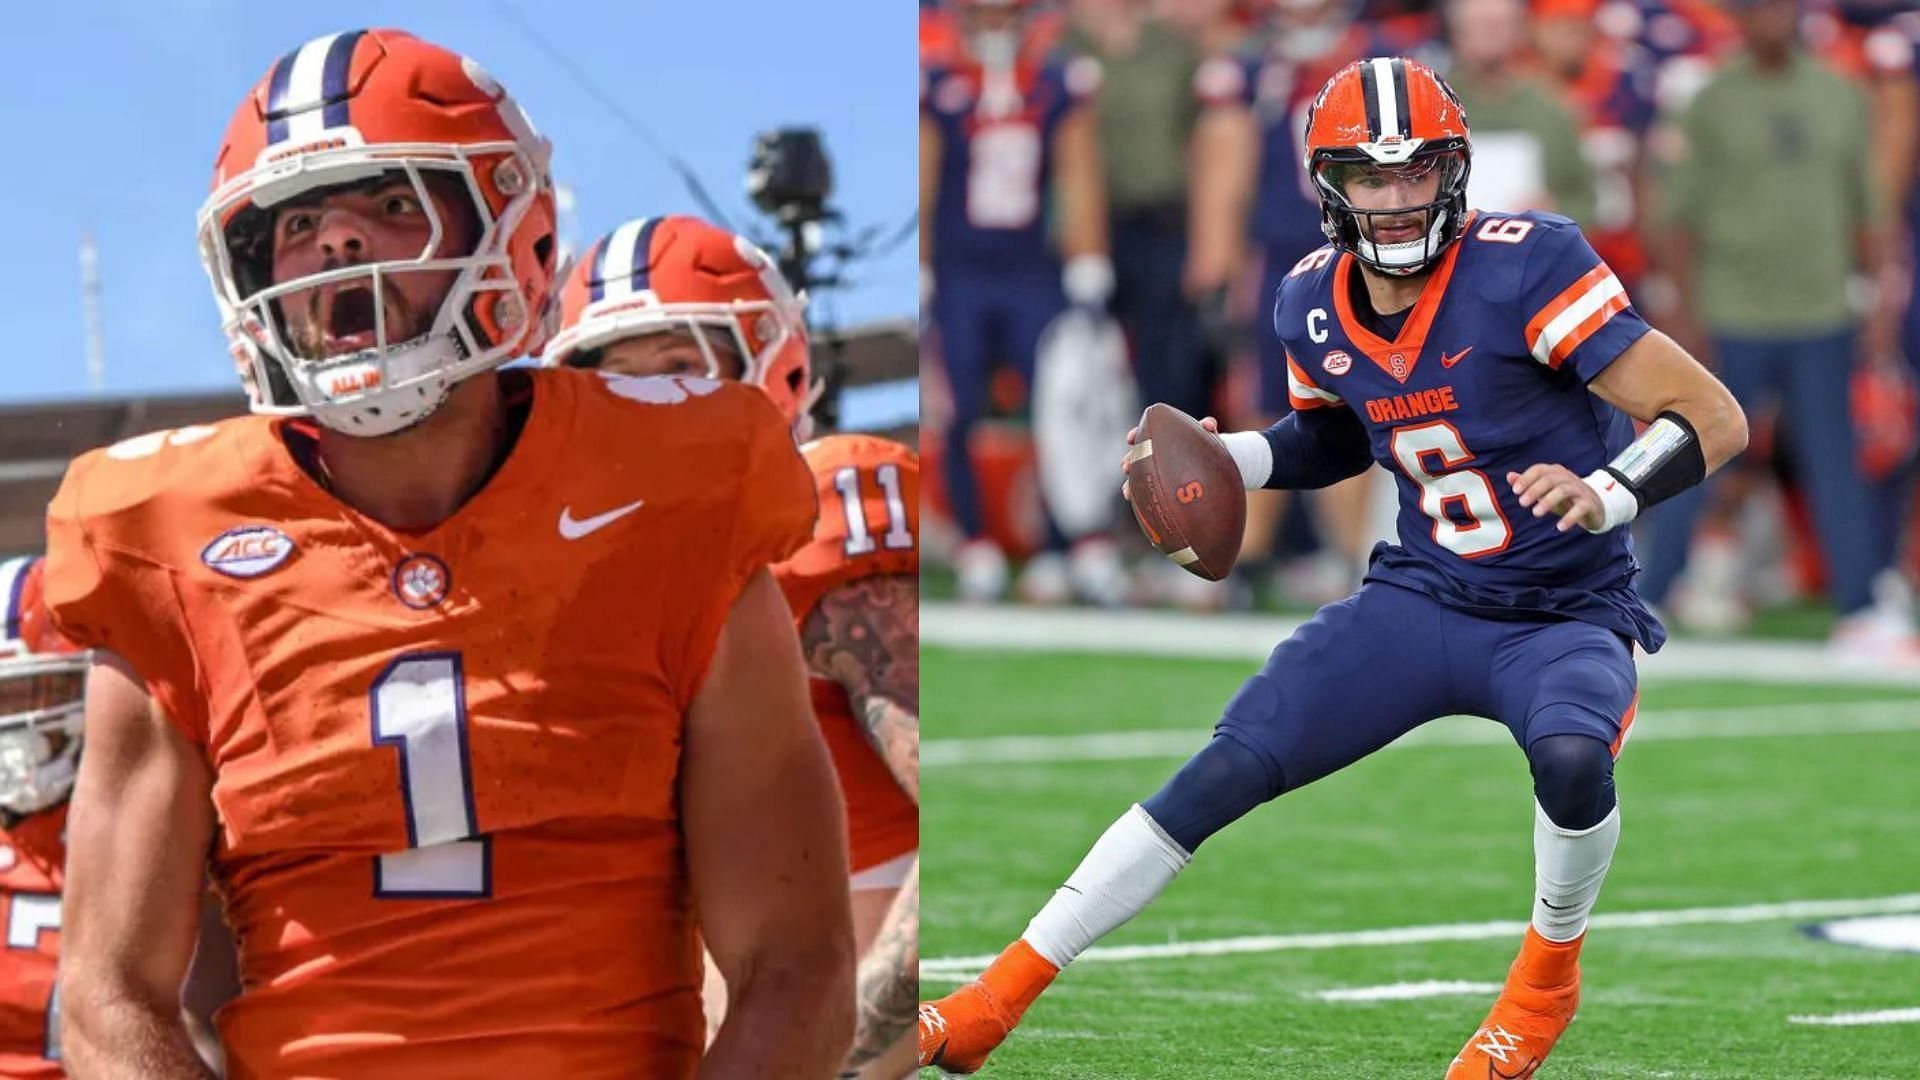 Clemson and Syracuse have played annually since 2013